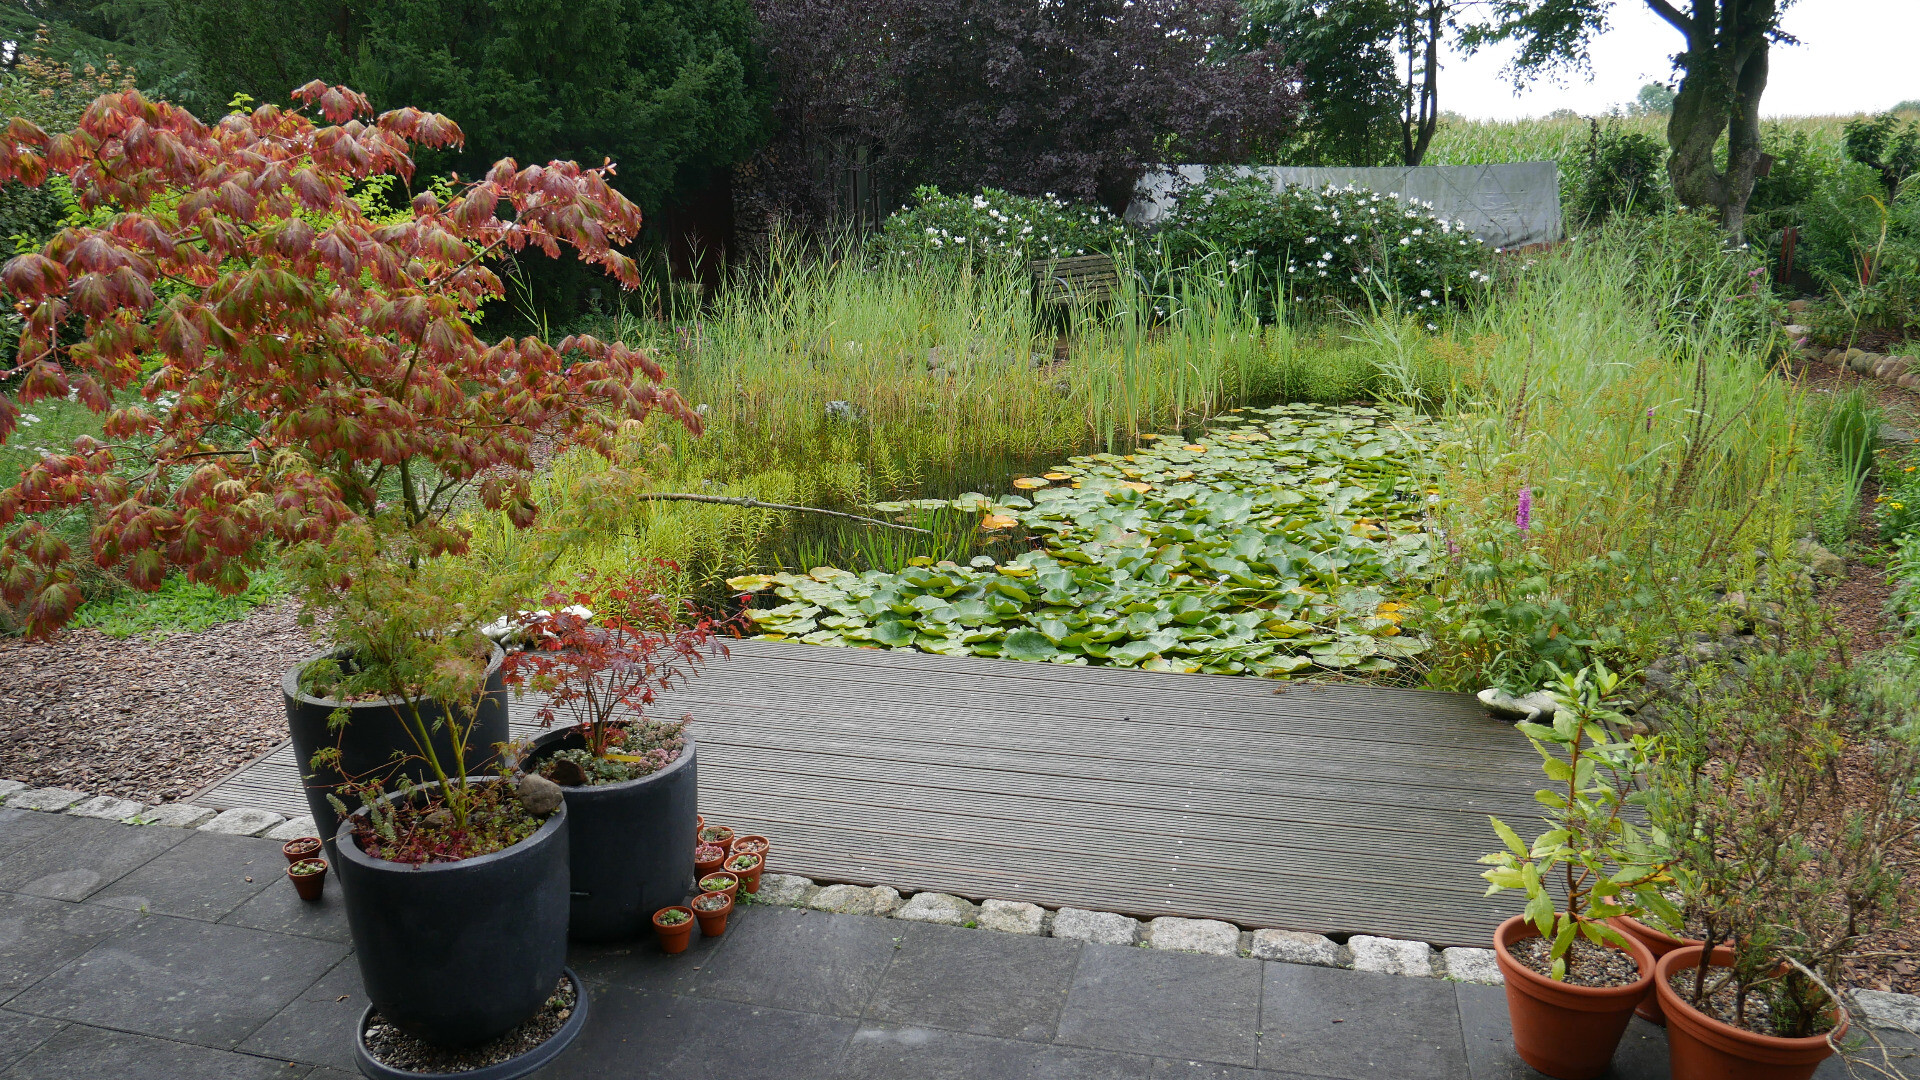 a pond with water lilies and a hedge with white flowers in the background, some red leafed acer in front